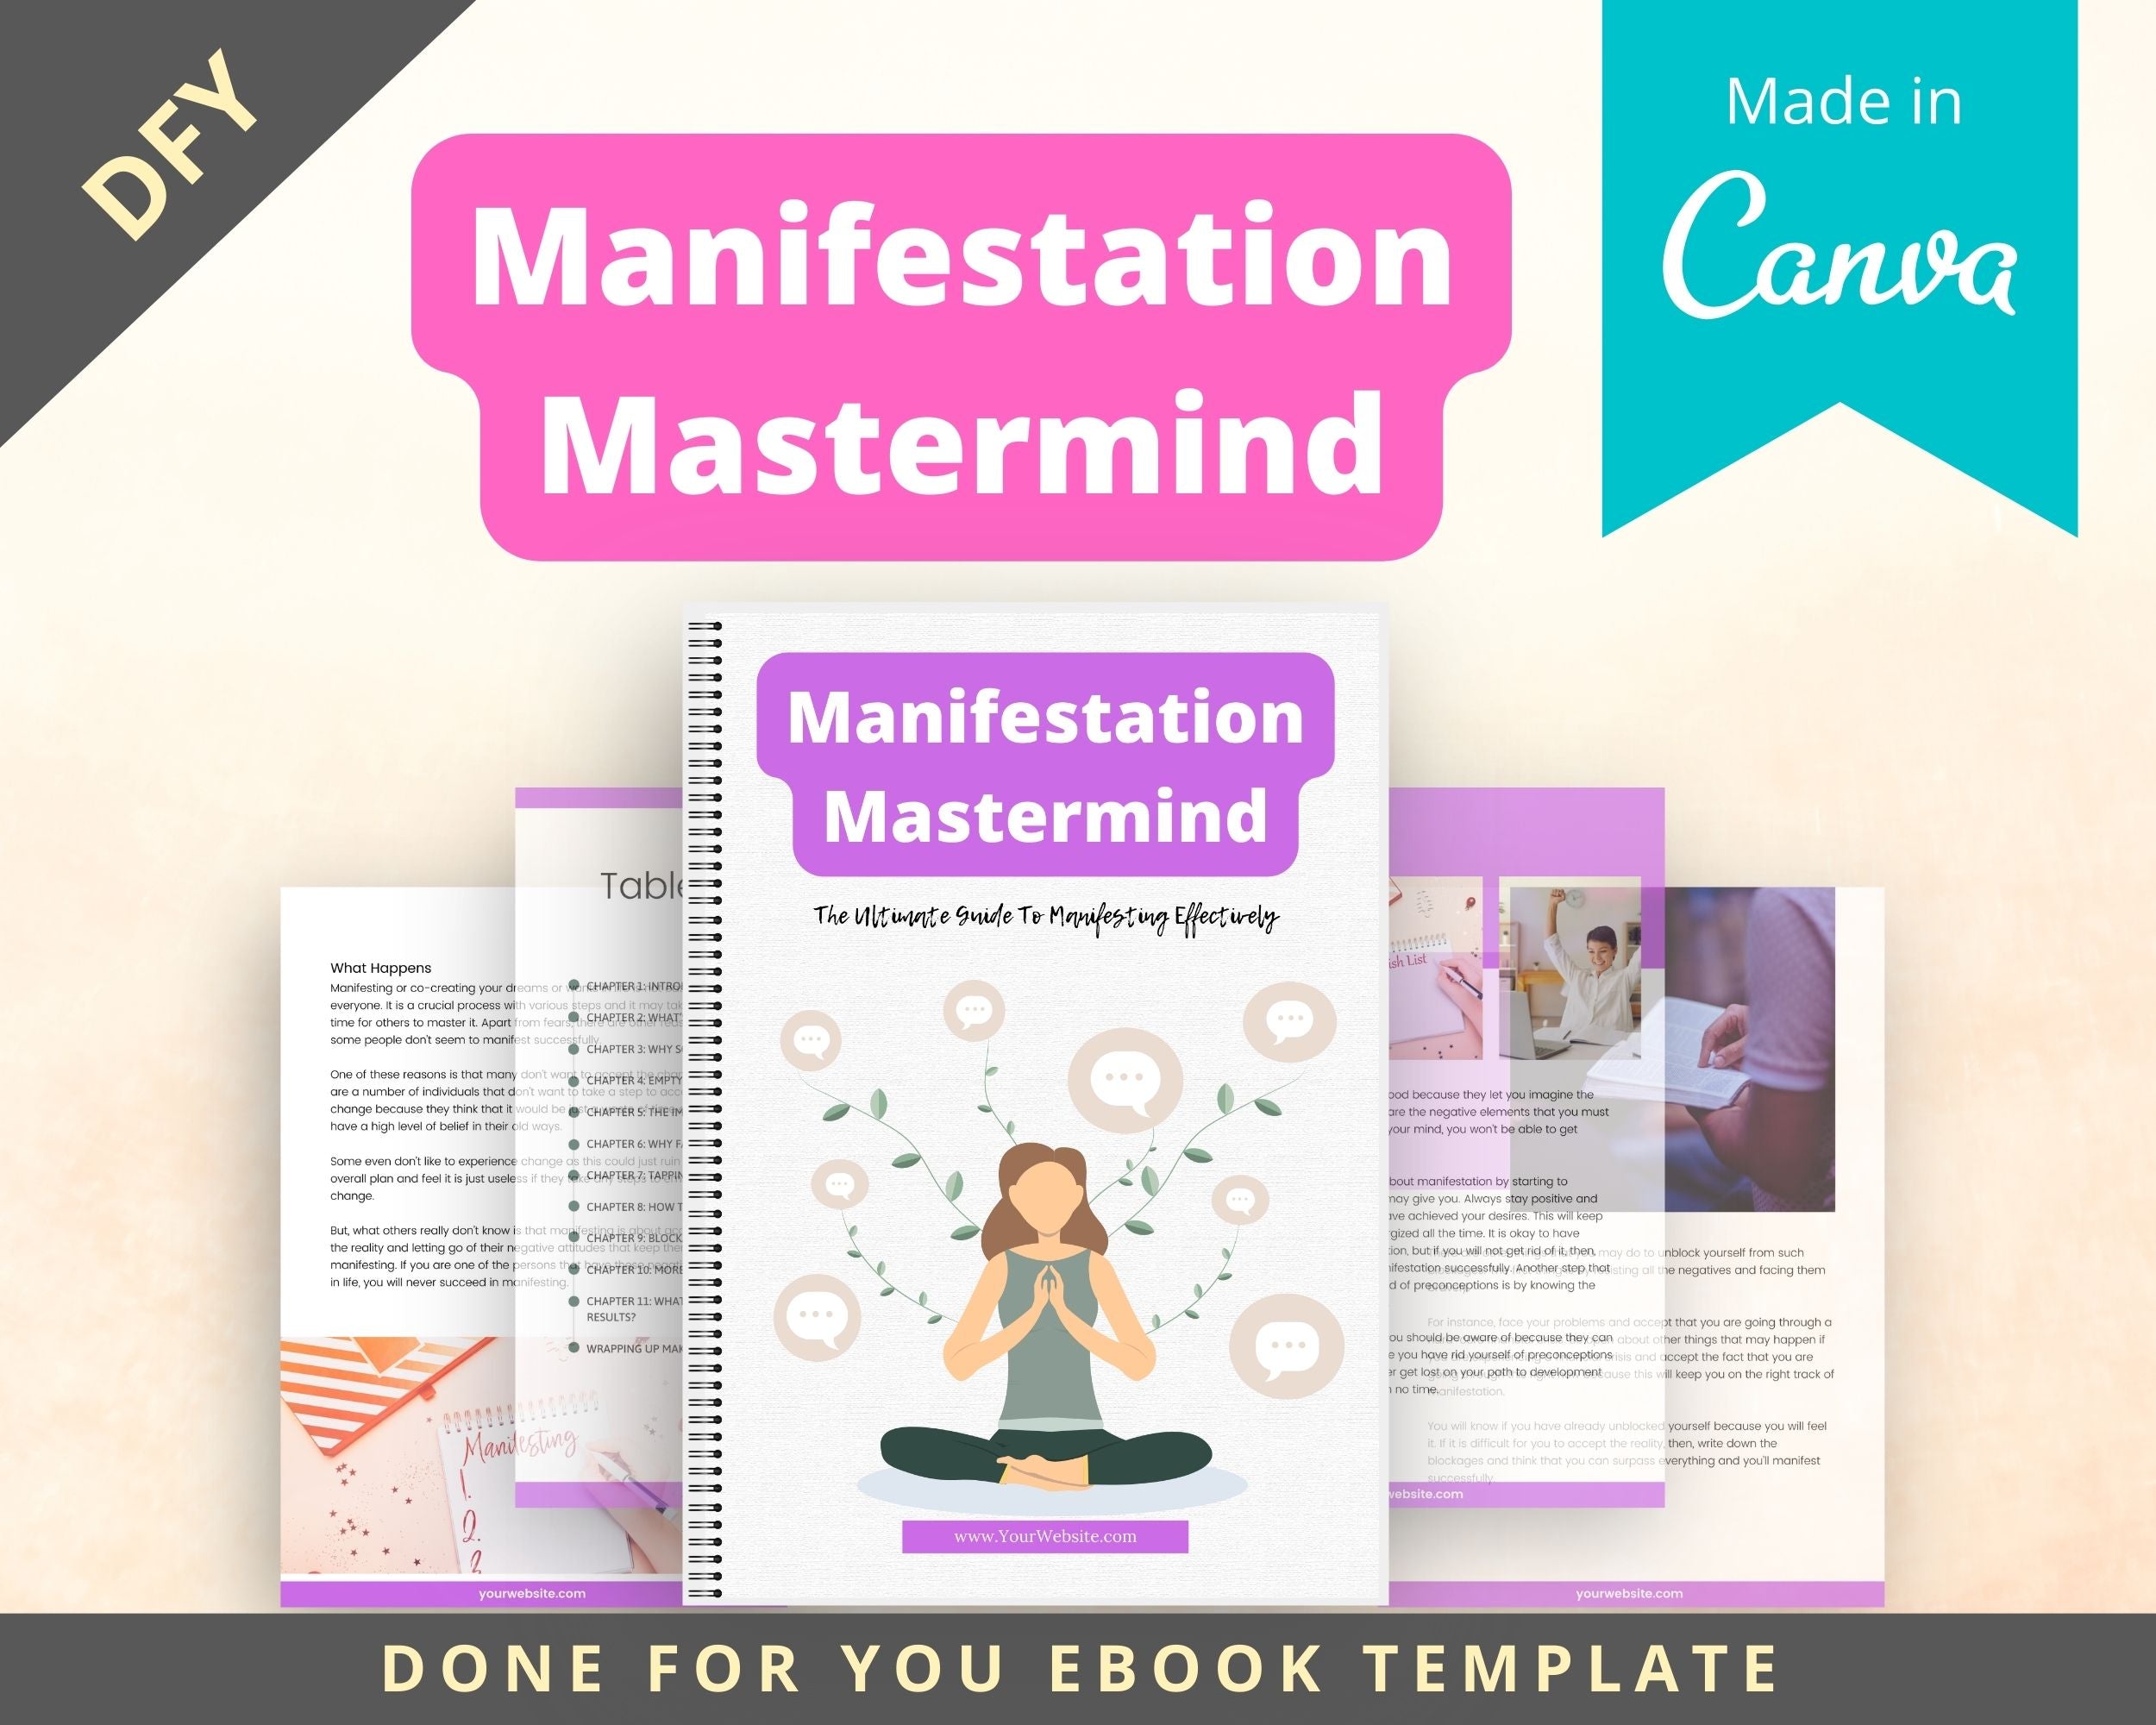 Editable Manifestation Mastermind Ebook | Done-for-You Ebook in Canva | Rebrandable and Resizable Canva Template